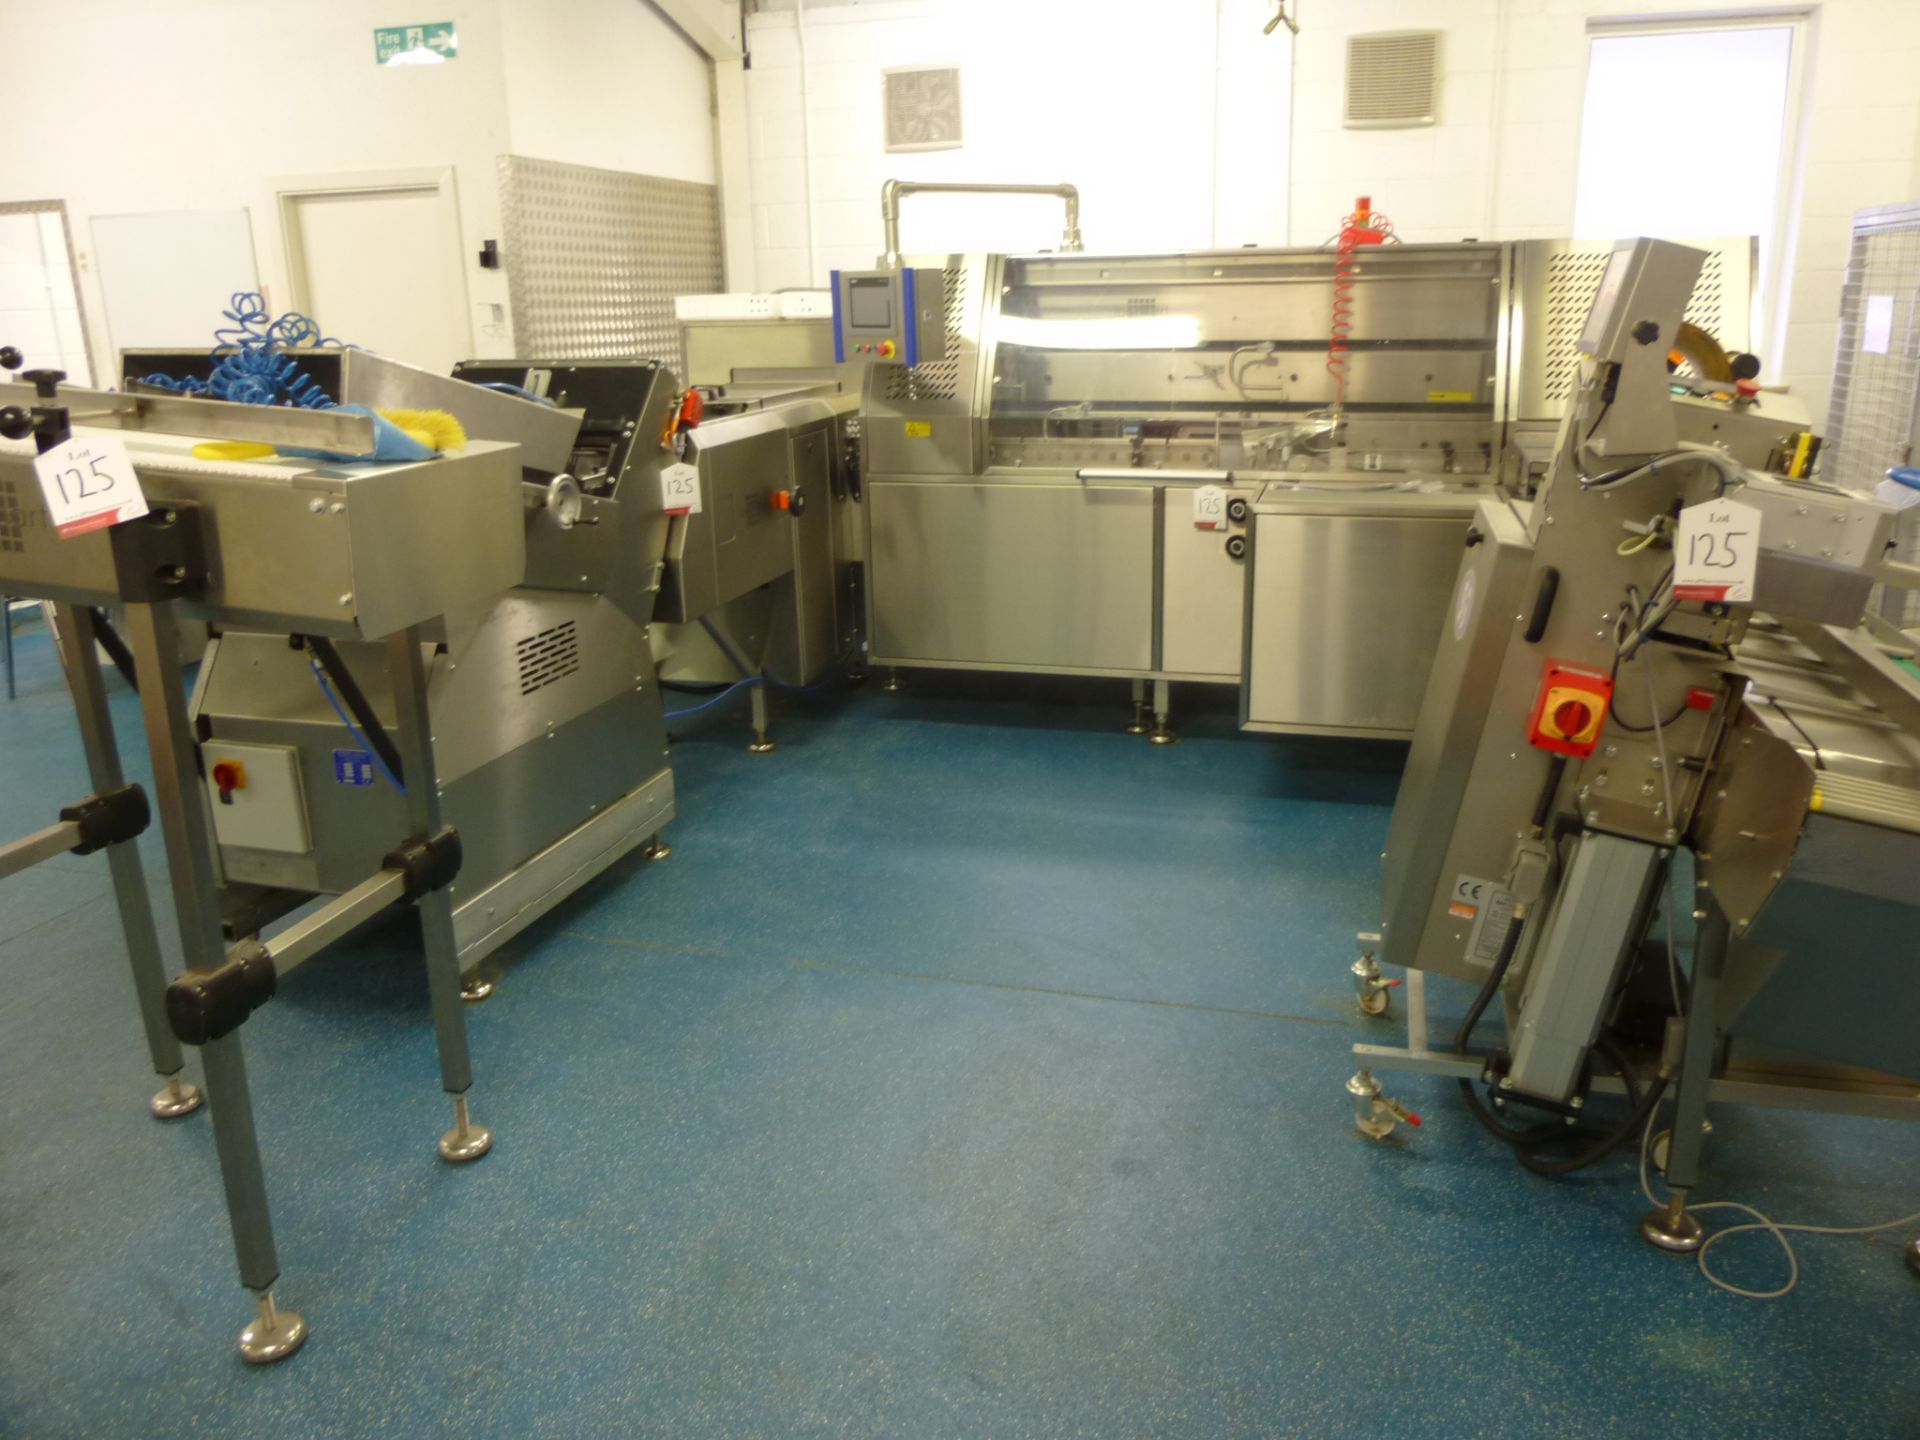 Entire Contents of a Commercial Bakery Production Facility - Advance Notice of Forthcoming Auction